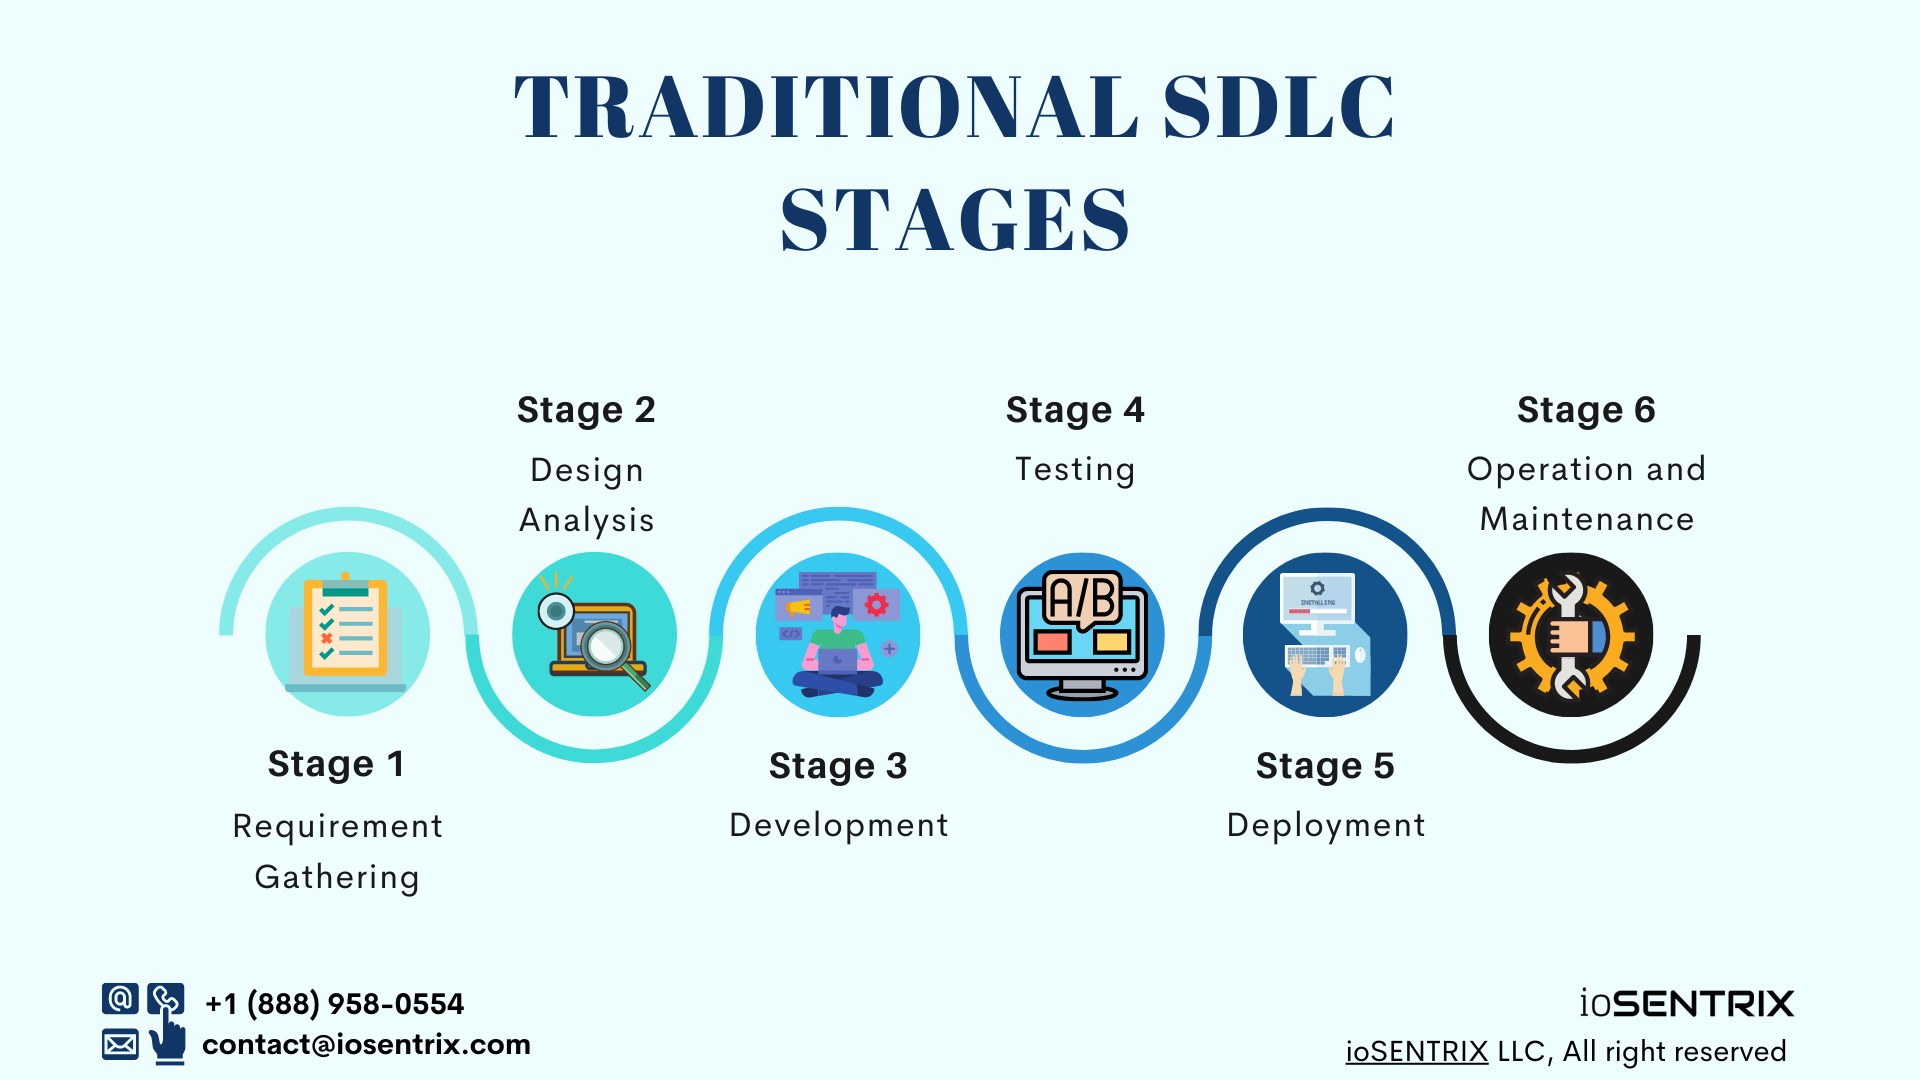 Traditional SDLC Stages